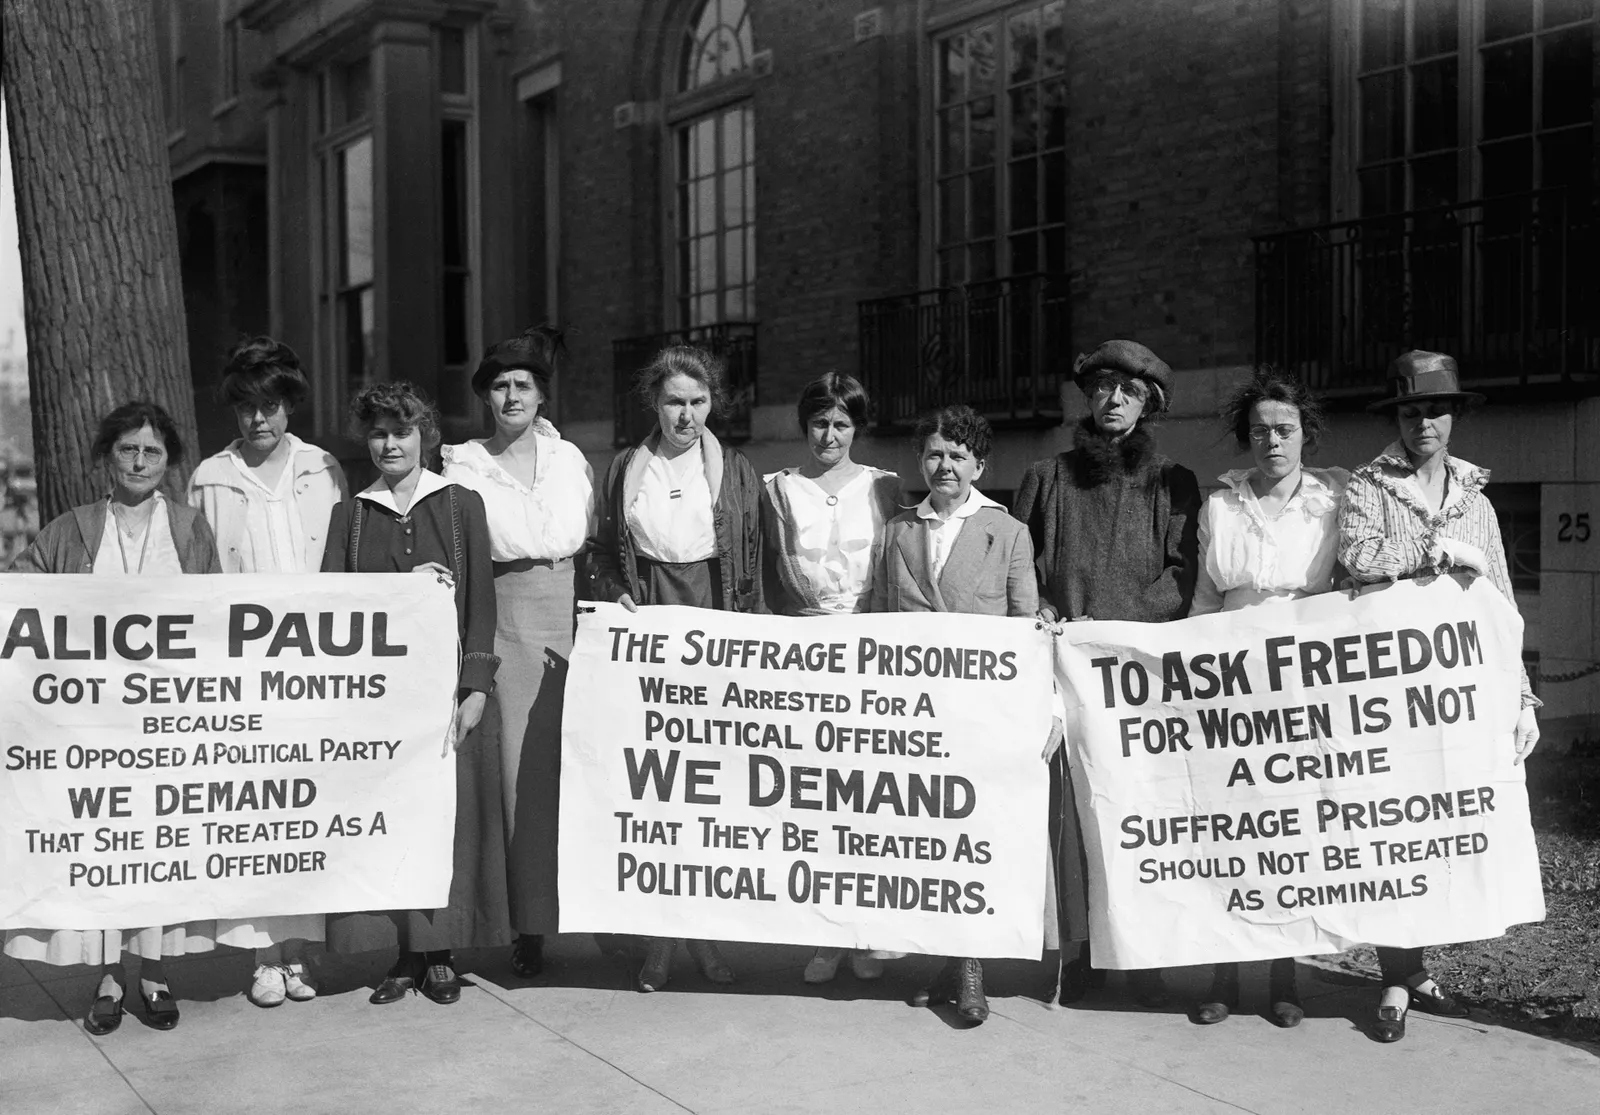 General Information About the Women's Suffrage Movement